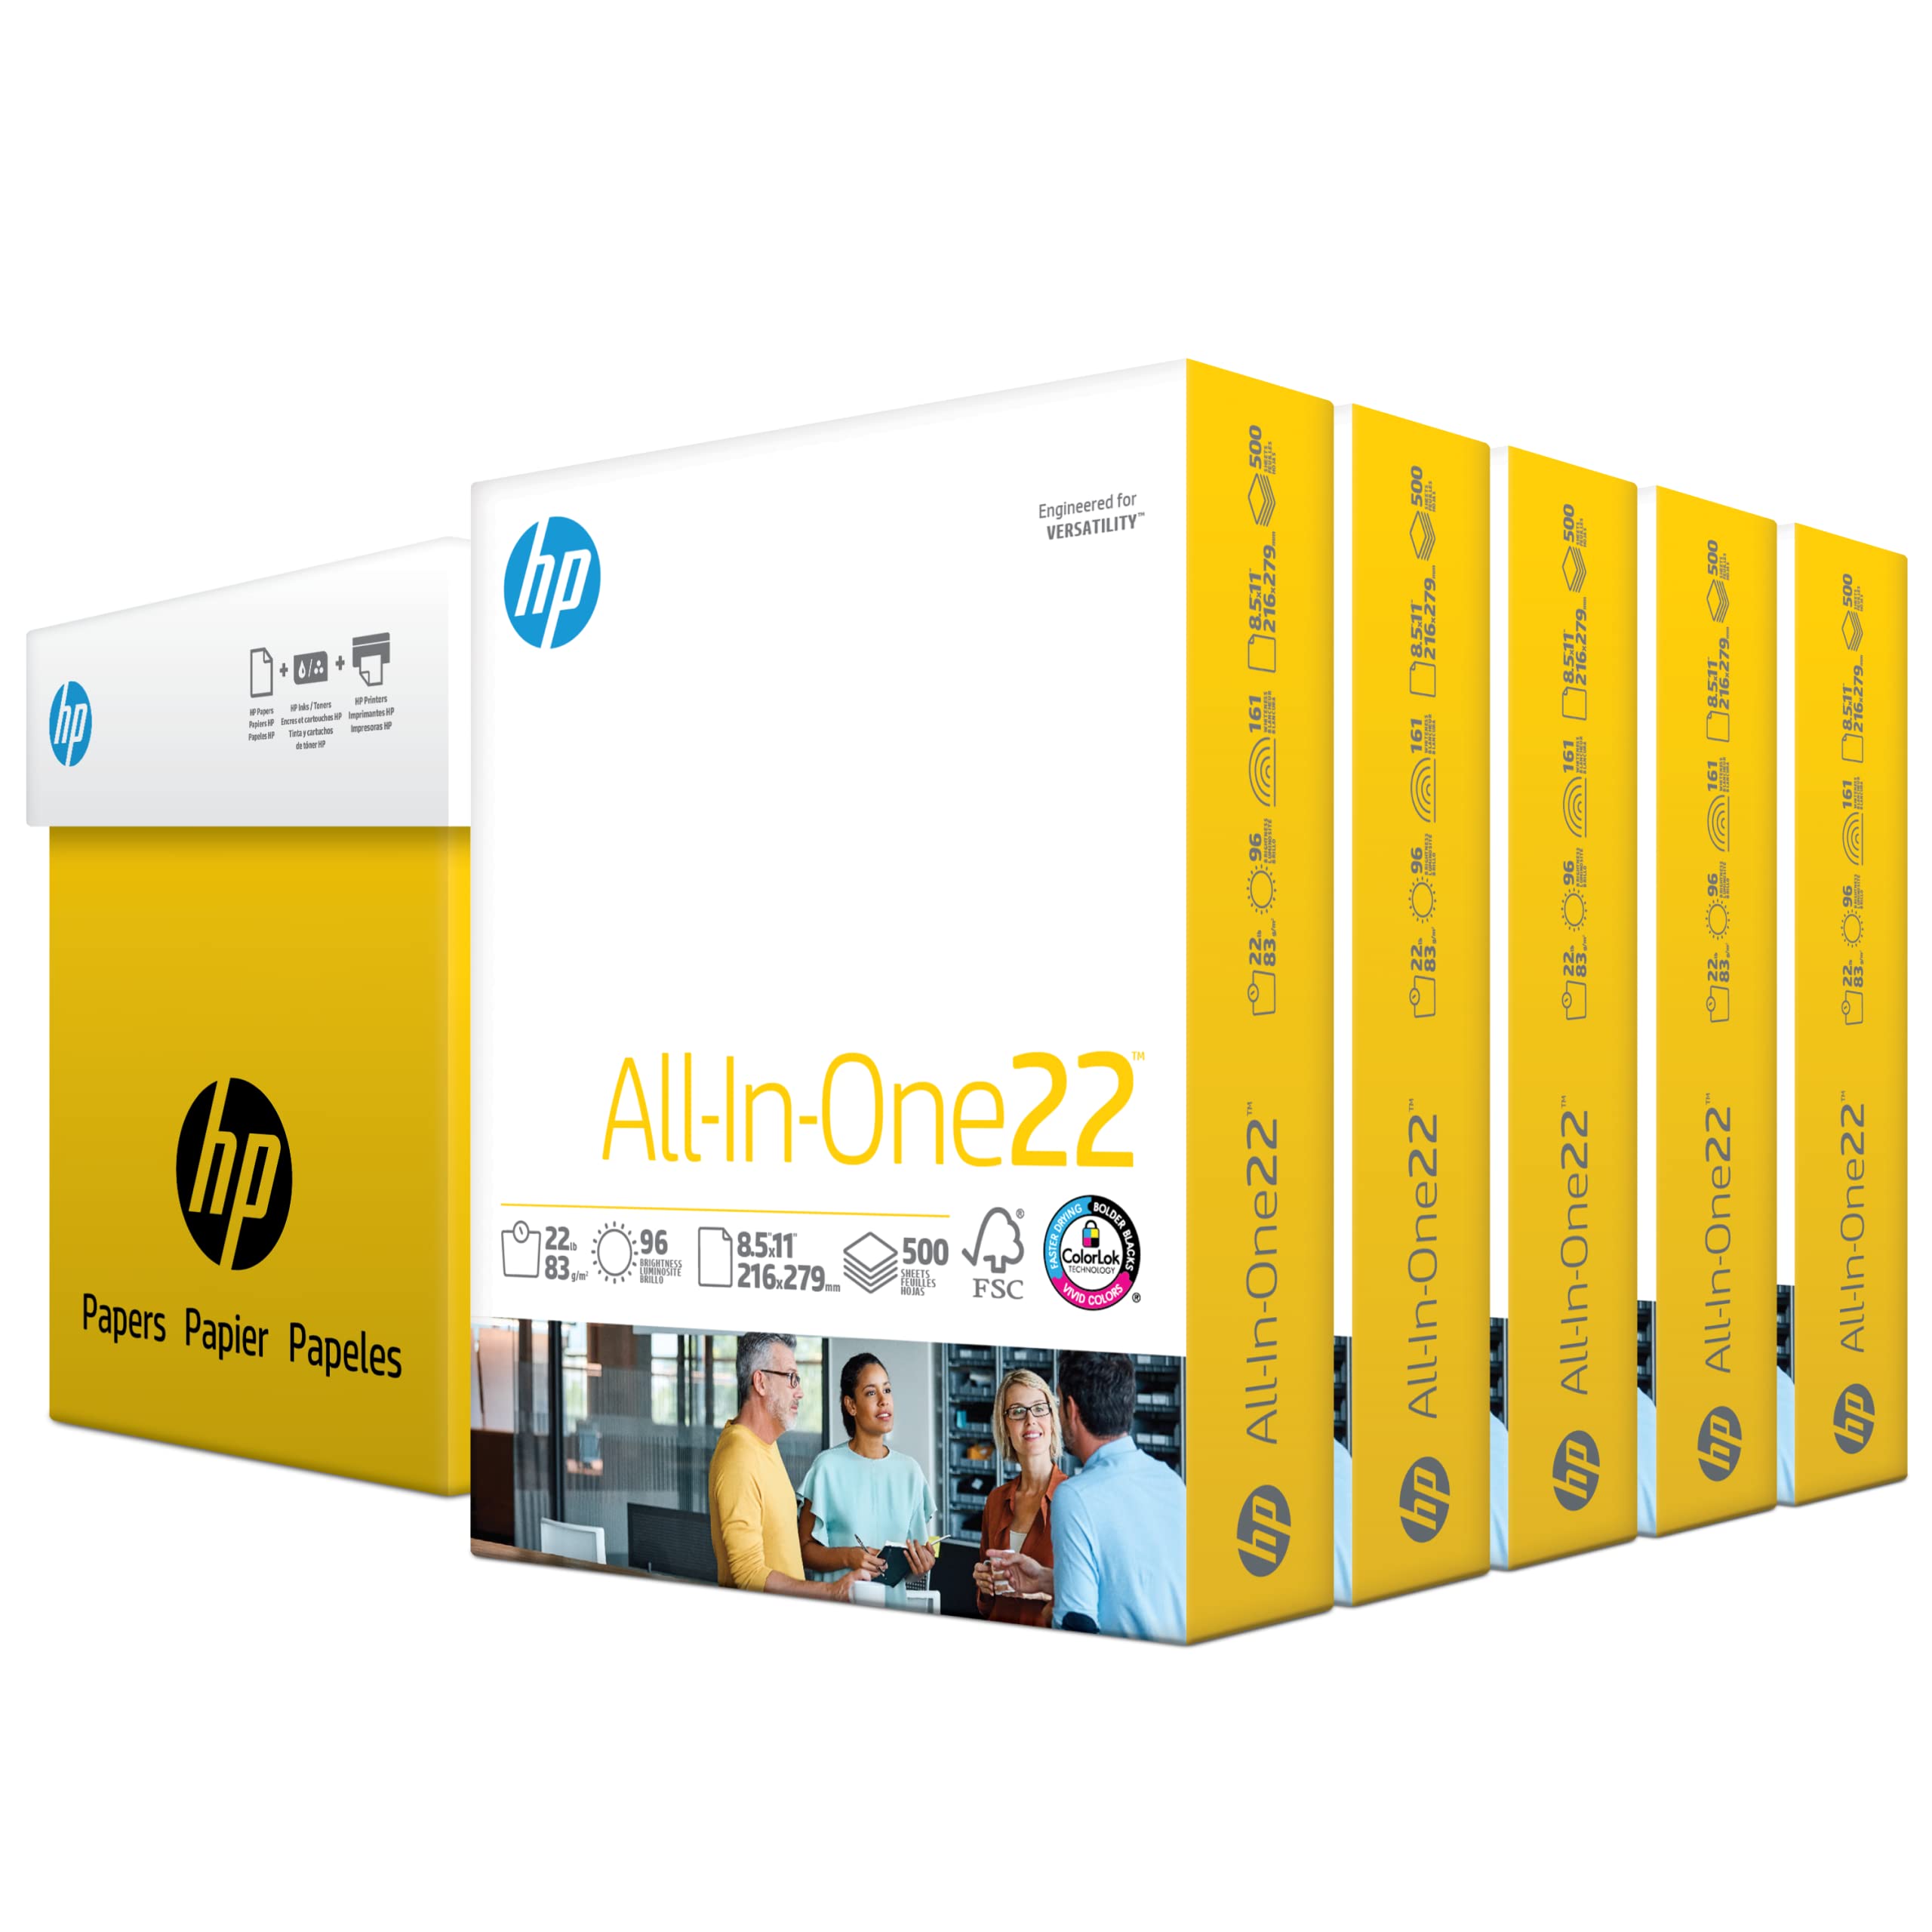 Book Cover HP Printer Paper | 8.5x 11 Paper | All-In-One 22 lb | 5 Ream Case - 2,500 Sheets | 96 Bright| Made in USA - FSC Certified | 207000C 5 Ream 2500 Sheets